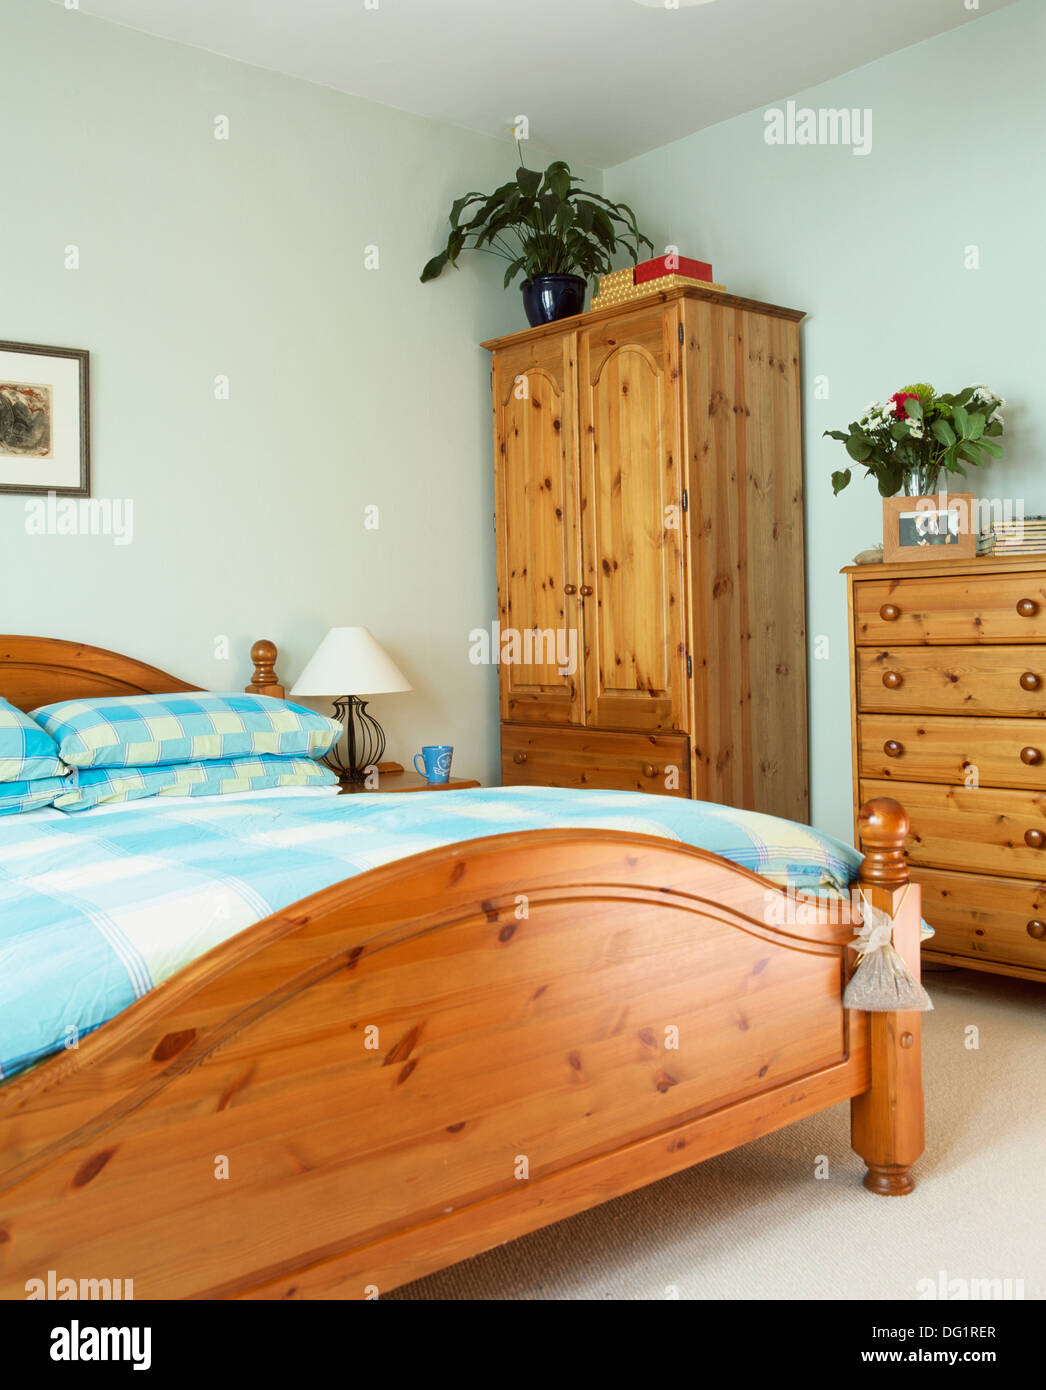 Pine bed with turquoise checked pillows and duvet in economy-style bedroom with pine wardrobe and chest-of-drawers Stock Photo